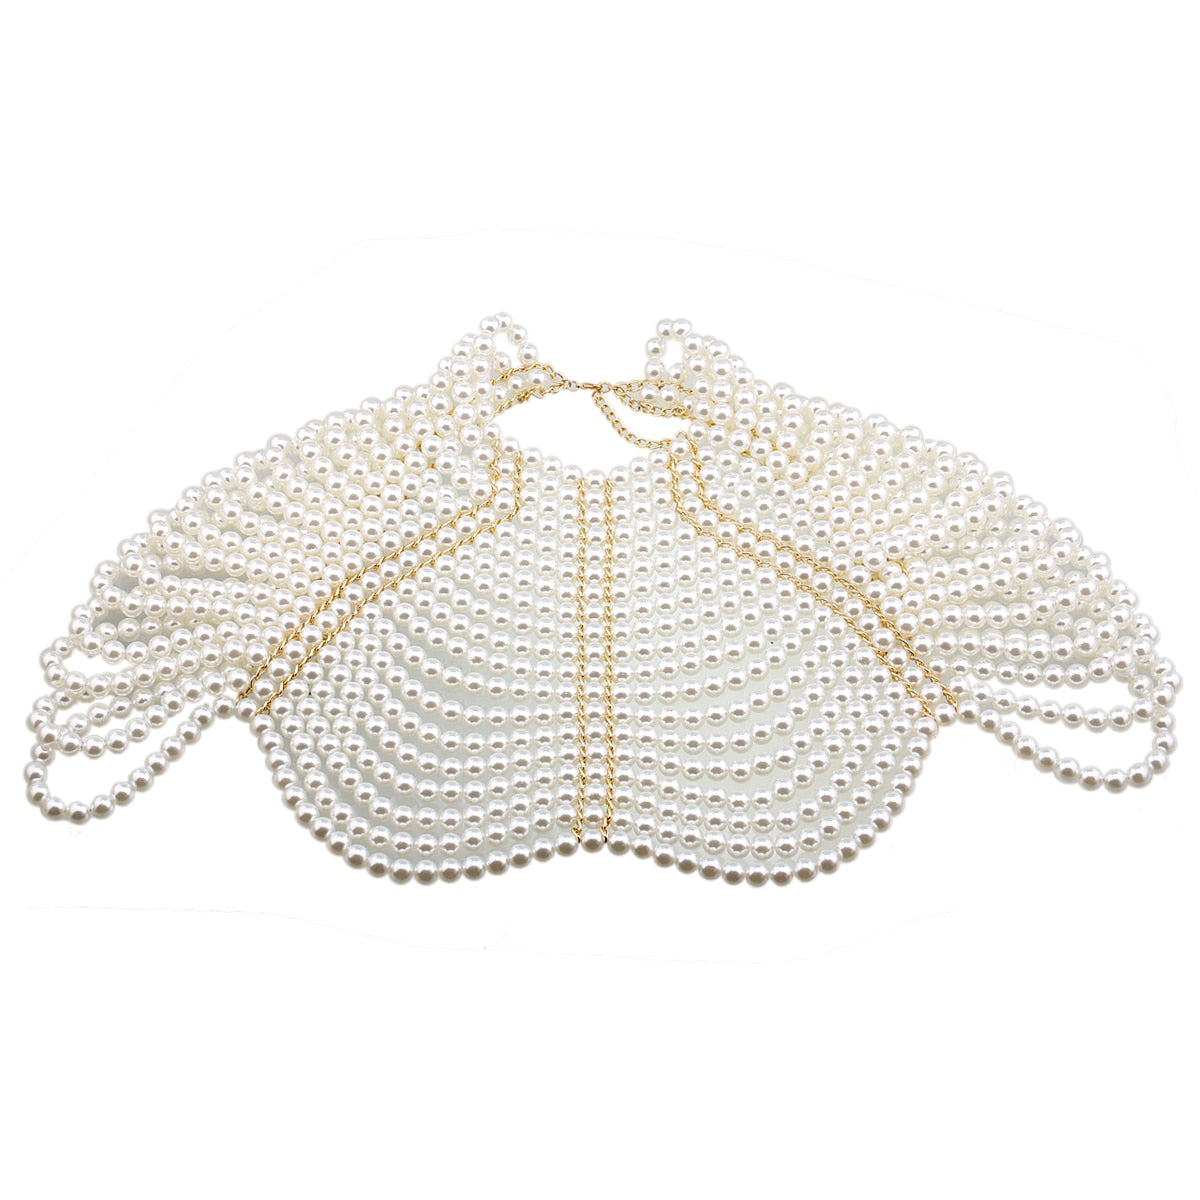 Stunning Exquisite Handcrafted Pearl Body Chains for Women | ULZZANG BELLA